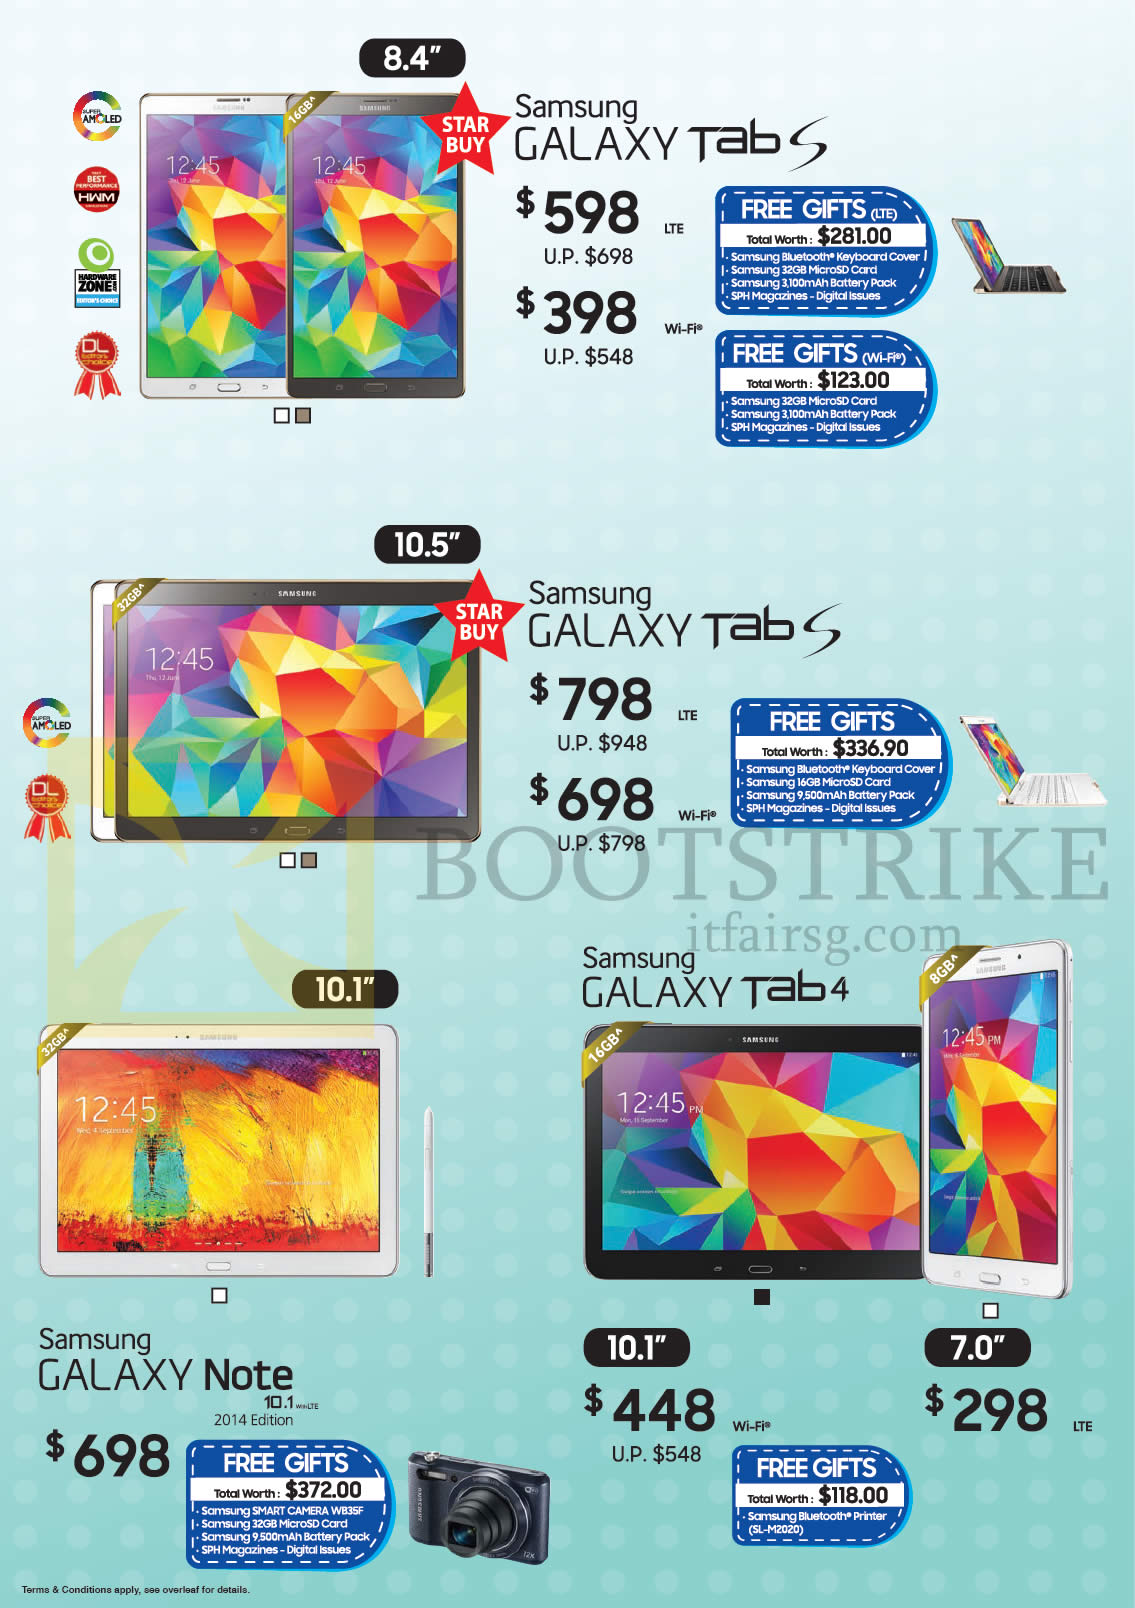 IT SHOW 2015 price list image brochure of Samsung Mobile Phones Galaxy Tab S 8.4, 10.5, Note 10.1, Tab 4 7.0, 10.1